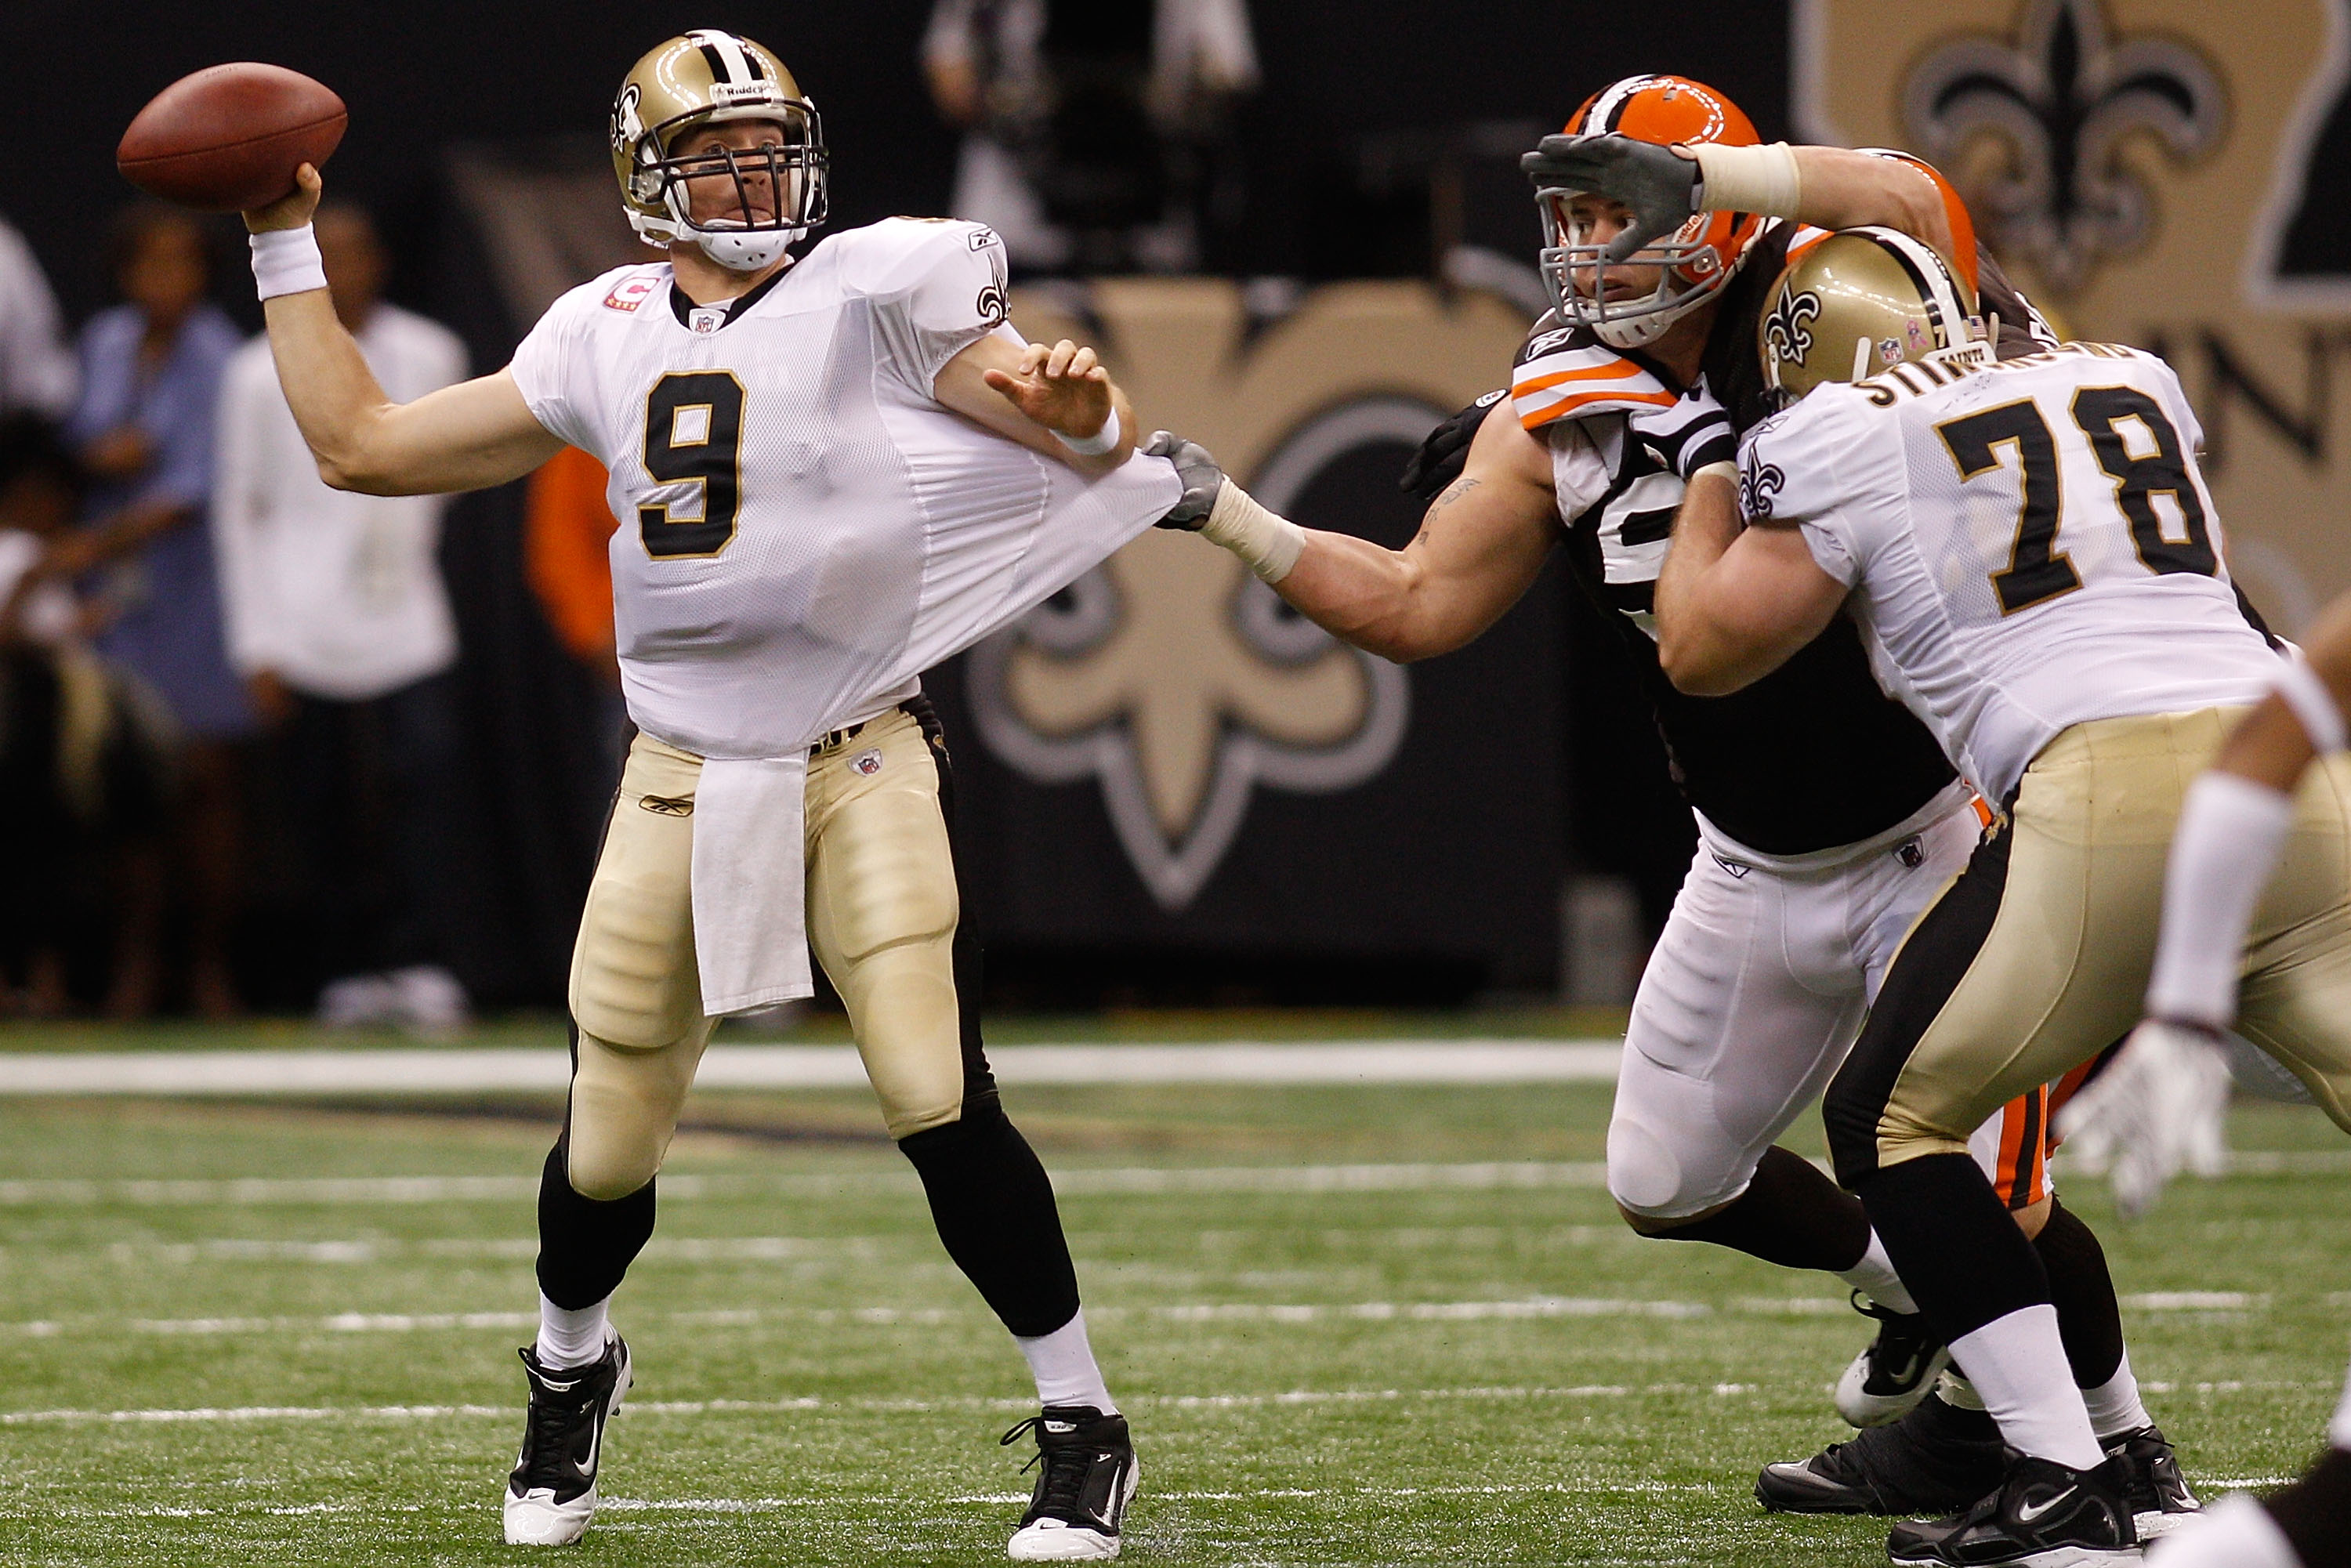 NEW ORLEANS - OCTOBER 24:  Drew Brees #9 of the New Orleans Saints in action during the game against the Cleveland Browns at the Louisiana Superdome on October 24, 2010 in New Orleans, Louisiana.  (Photo by Chris Graythen/Getty Images)